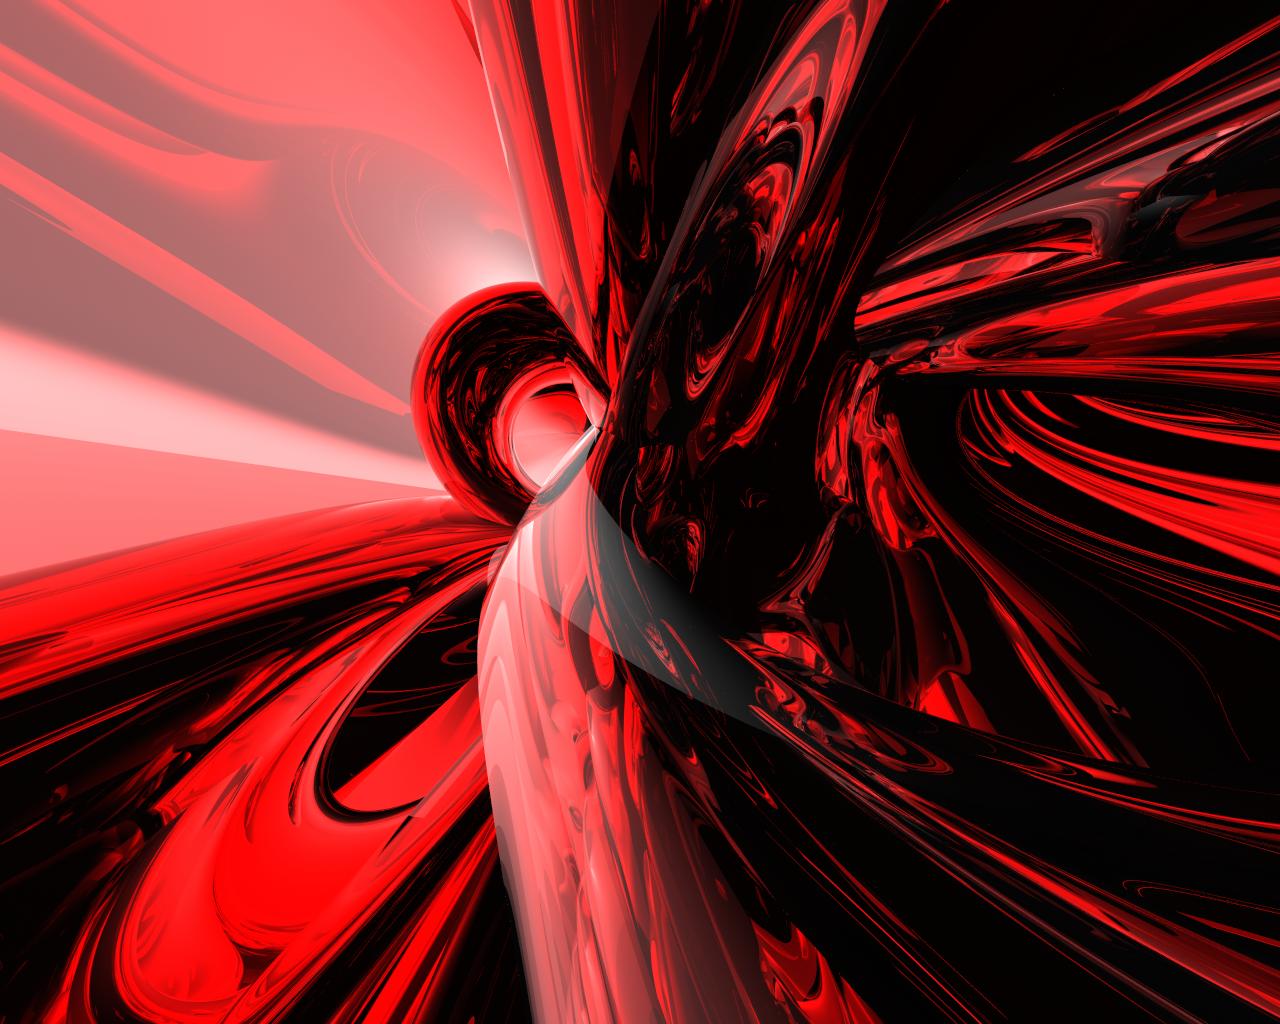 Red and Black Abstract Art